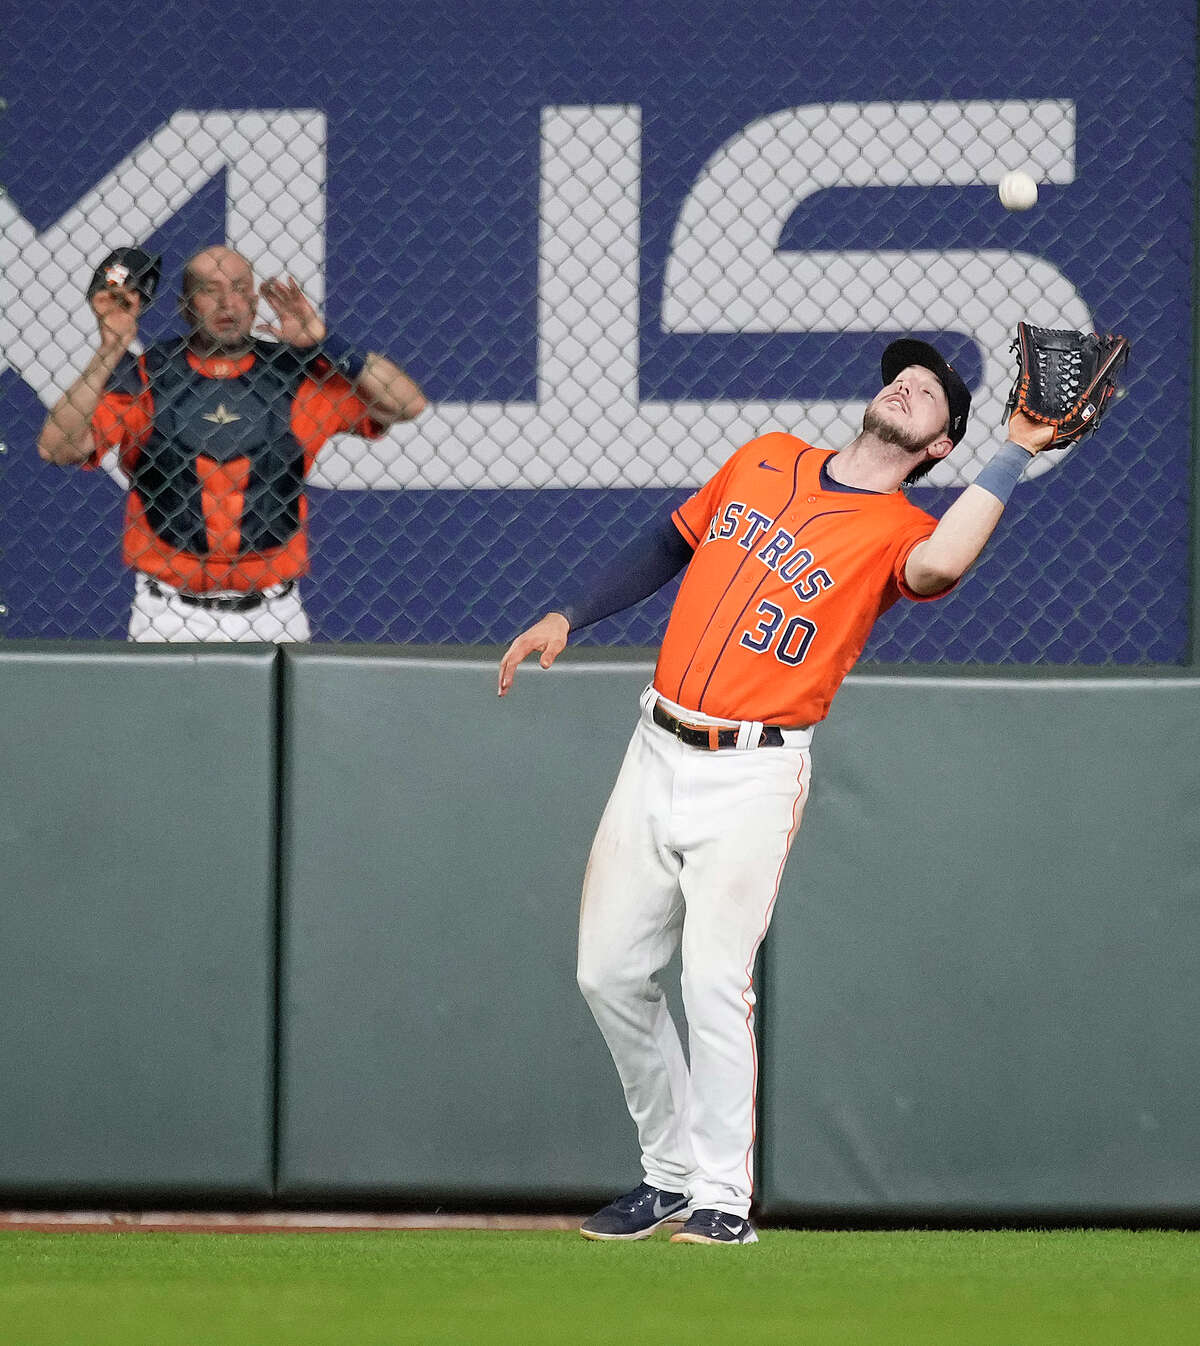 Houston Astros right fielder Kyle Tucker (30) catches Chicago White Sox Luis Robert's fly out during the eighth inning of an MLB game at Minute Maid Park on Friday, June 17, 2022 in Houston.